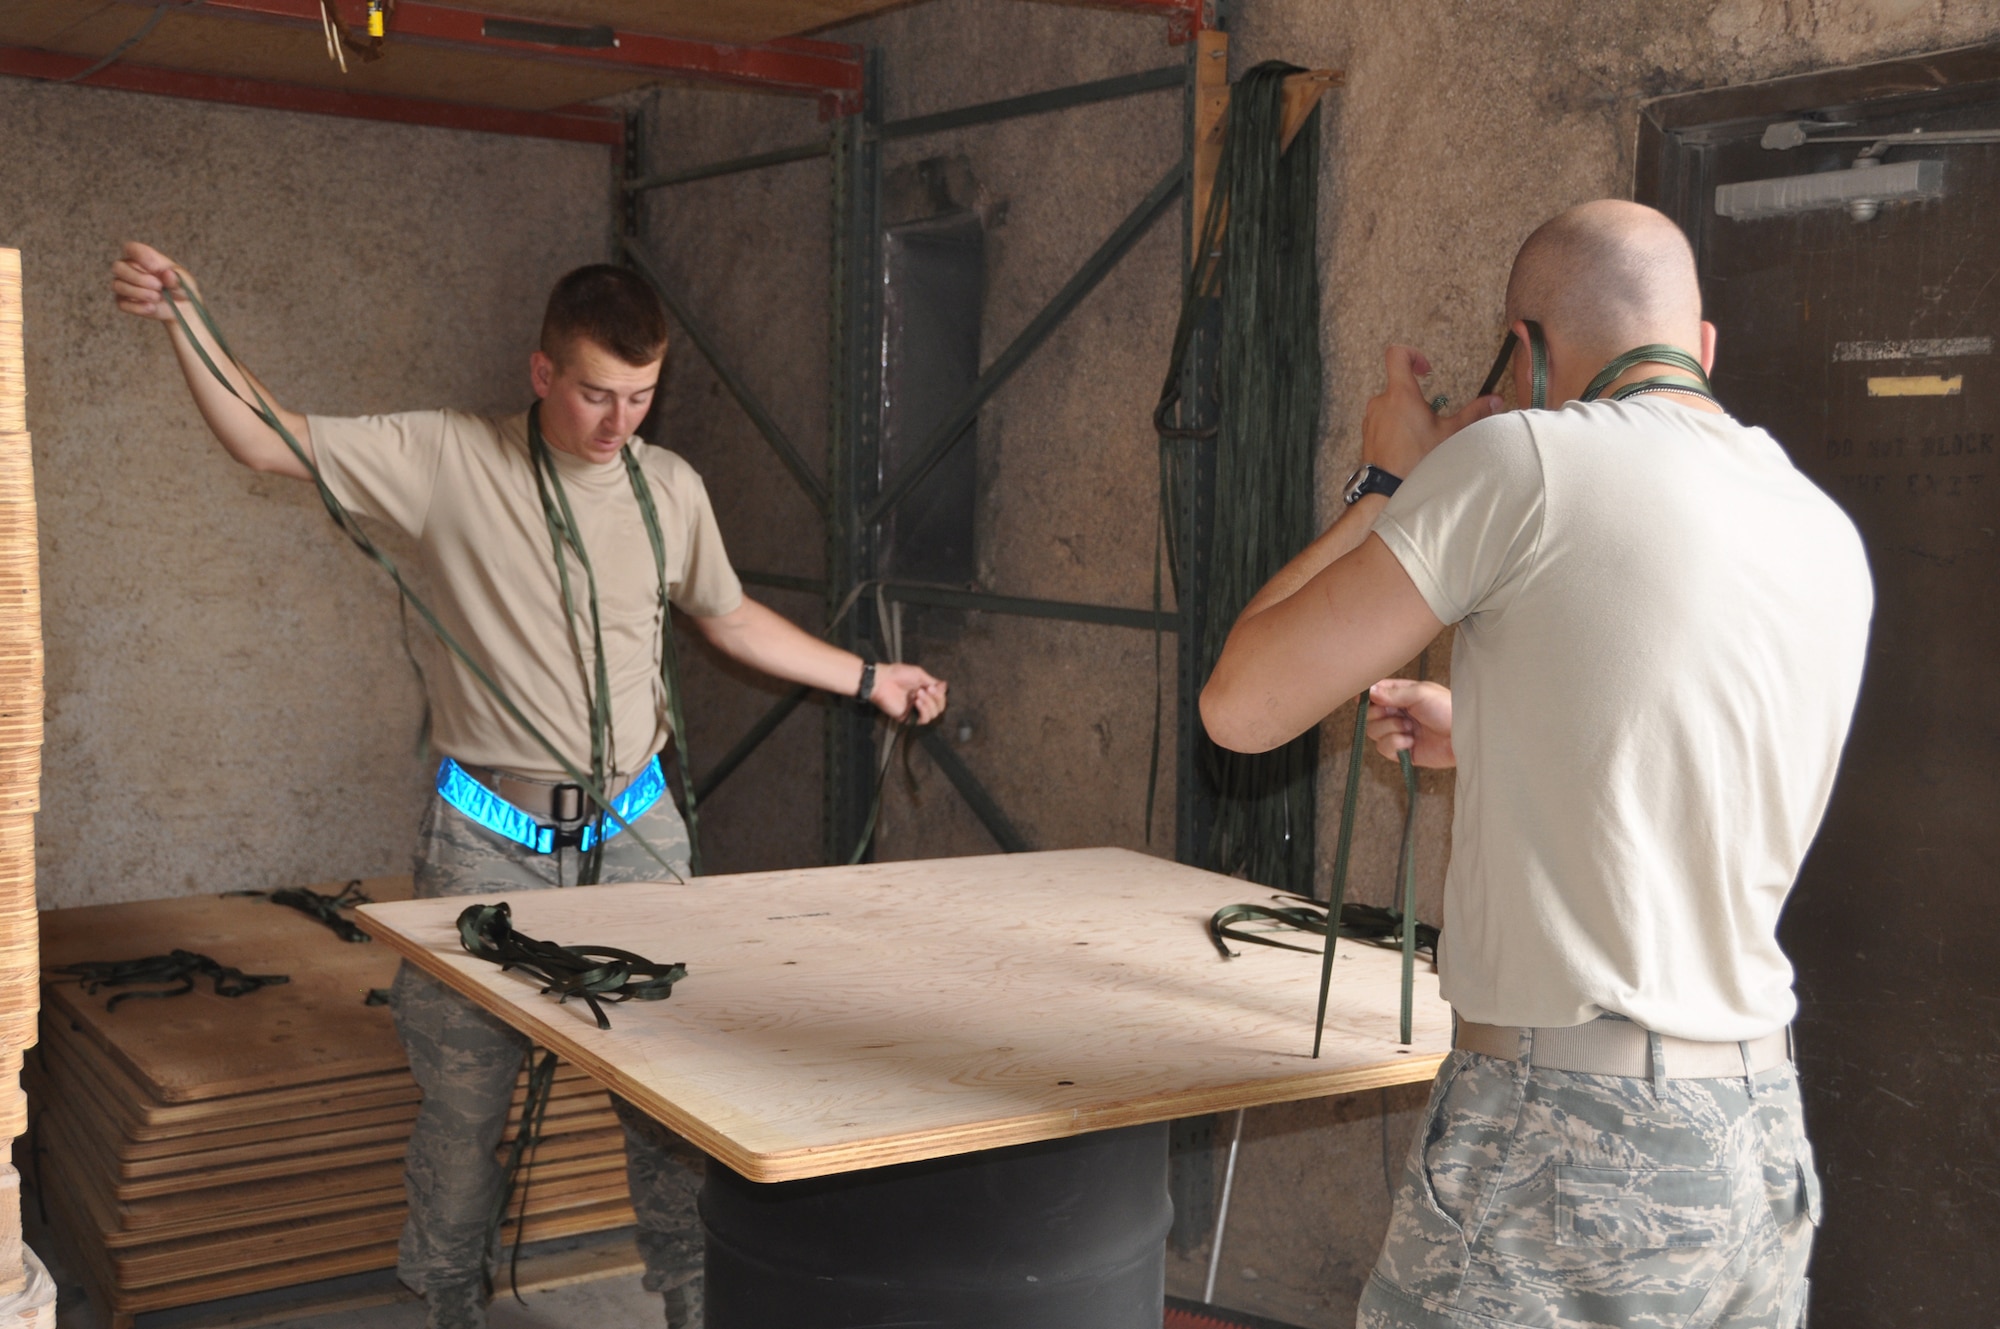 U.S. Air Force Academy Cadet 2nd Class Keegan Peckham and USAFA Cadet 2nd Class Elliot Unseth prepare the pallets for bundles by stringing them with fastening straps while working with the U.S. Army Riggers detachment June 18, 2011, in Southwest Asia. Cadets Peckham and Unseth are taking part in "Deployed Ops", a summer program that sends Academy cadets to deployed locations to follow officers in different career fields and to gain an understanding of career responsibilities. (U.S. Air Force photo/Cadet 1st Class Shaina Thompson)
